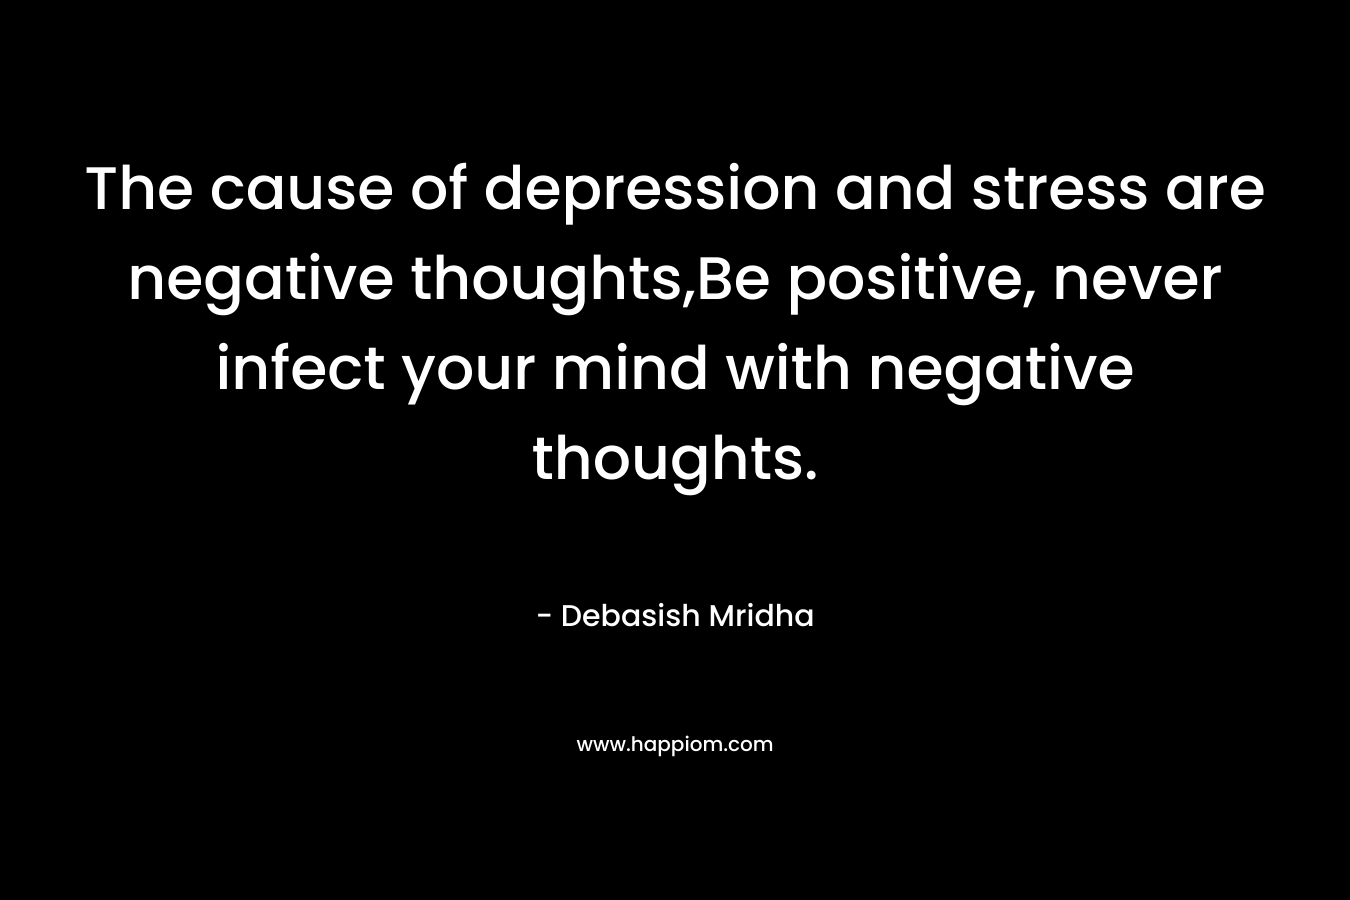 The cause of depression and stress are negative thoughts,Be positive, never infect your mind with negative thoughts.